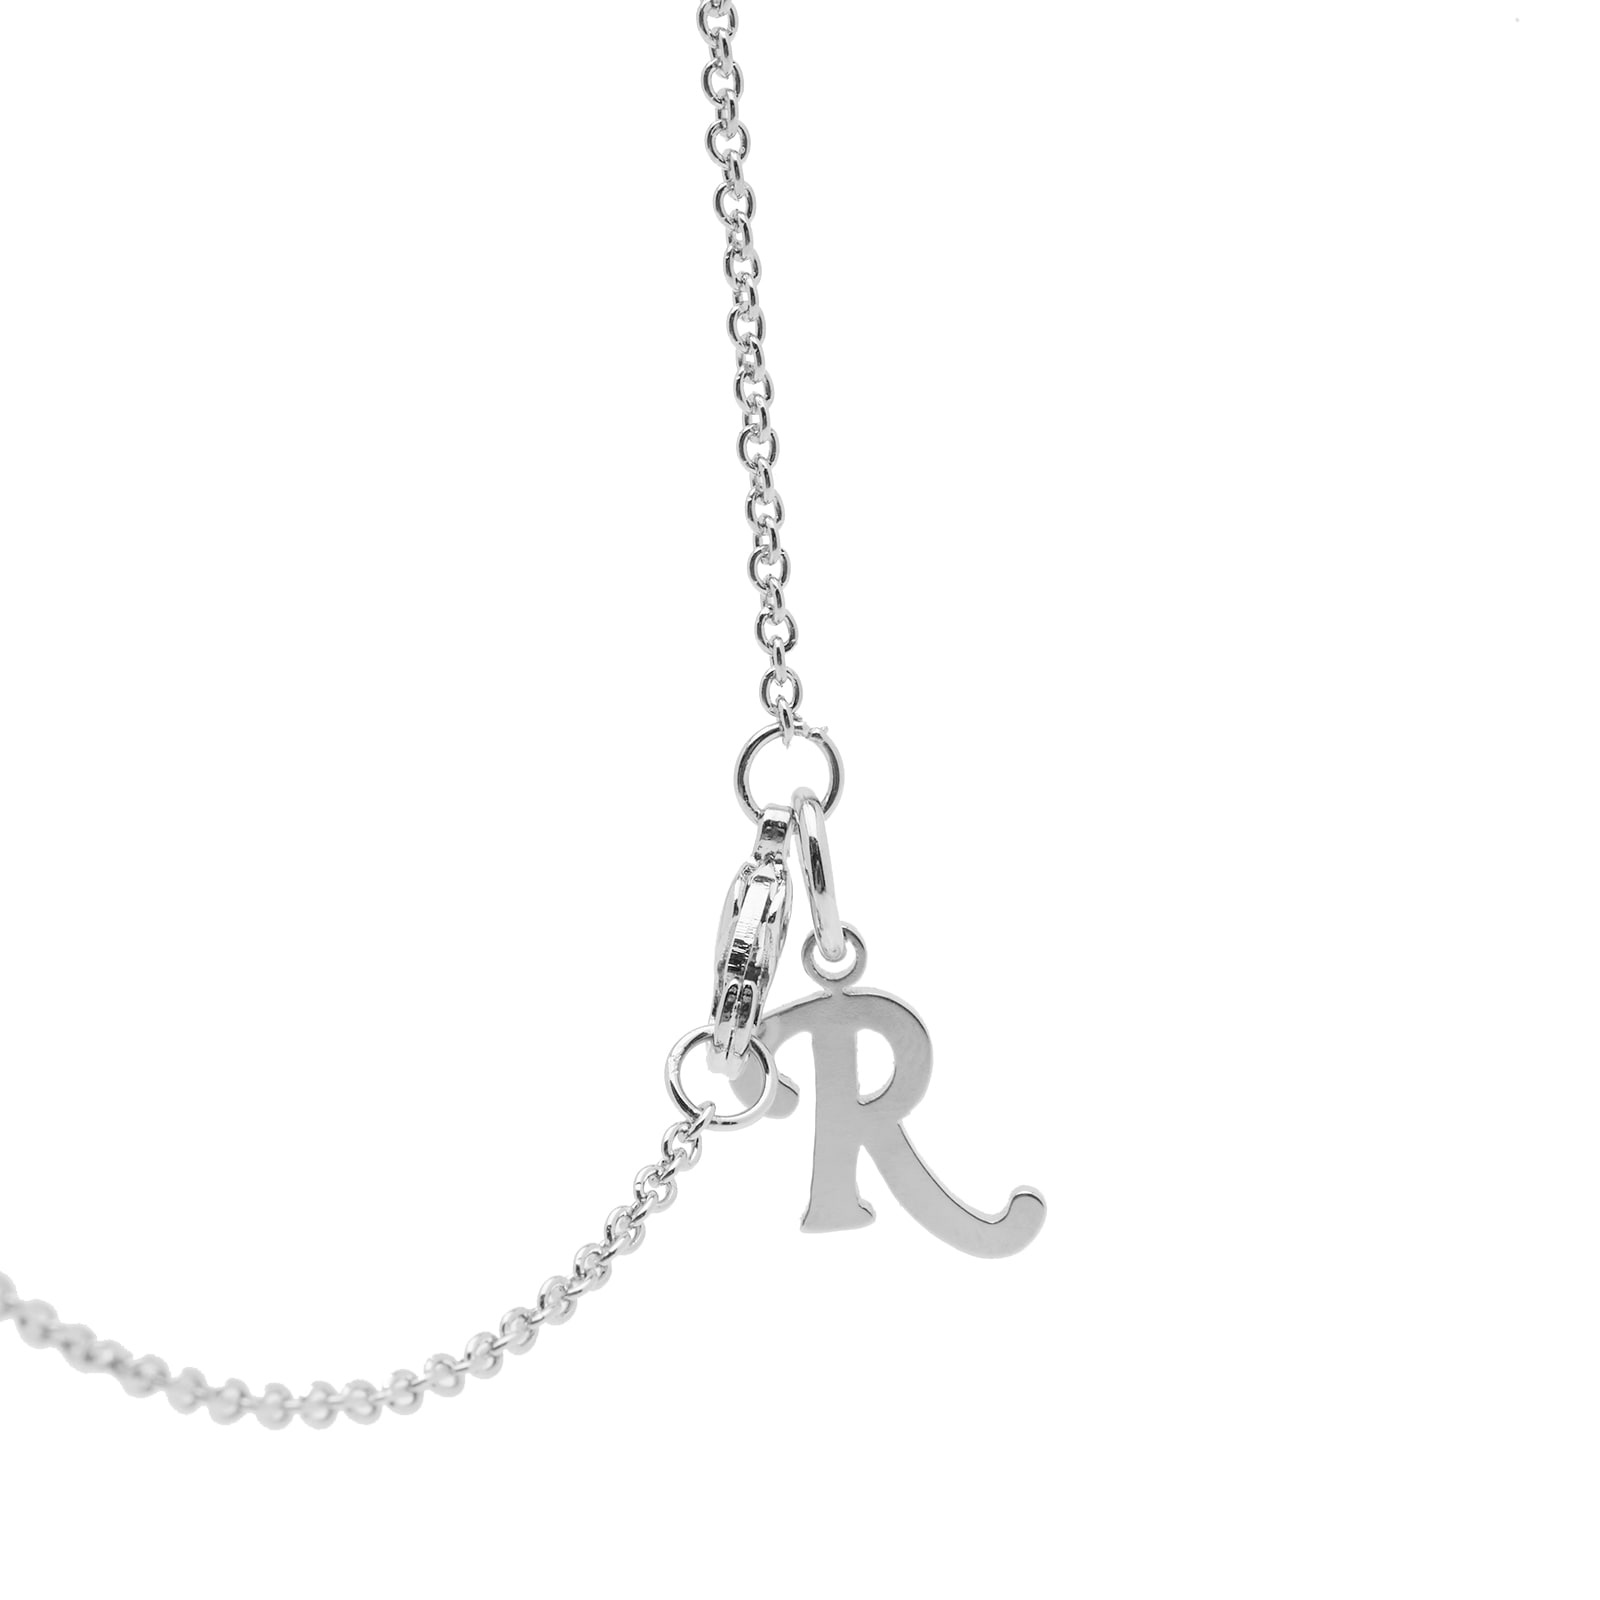 Raf Simons Small Key On Hanger Necklace - 2